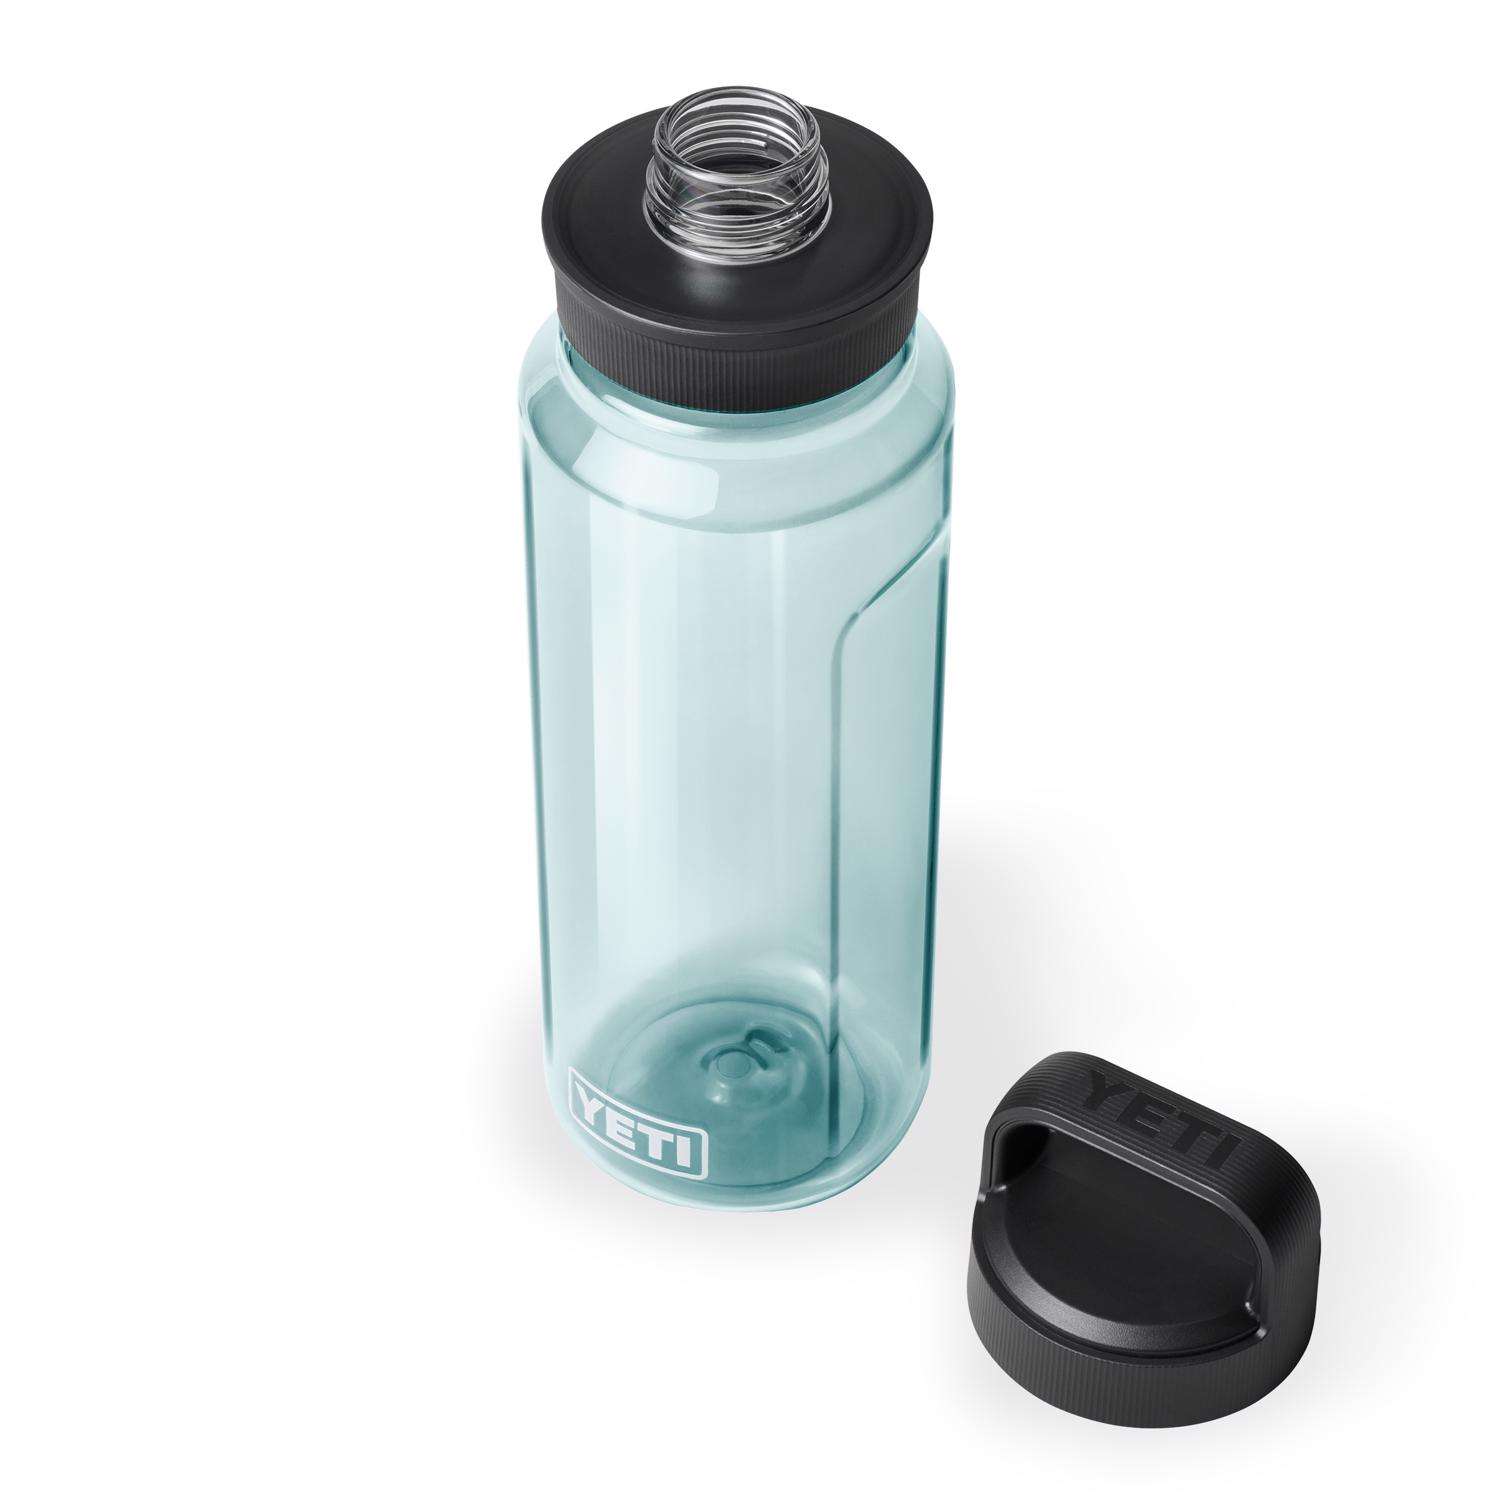 Promotional Igloo 26 oz. vacuum insulated bottle Personalized With